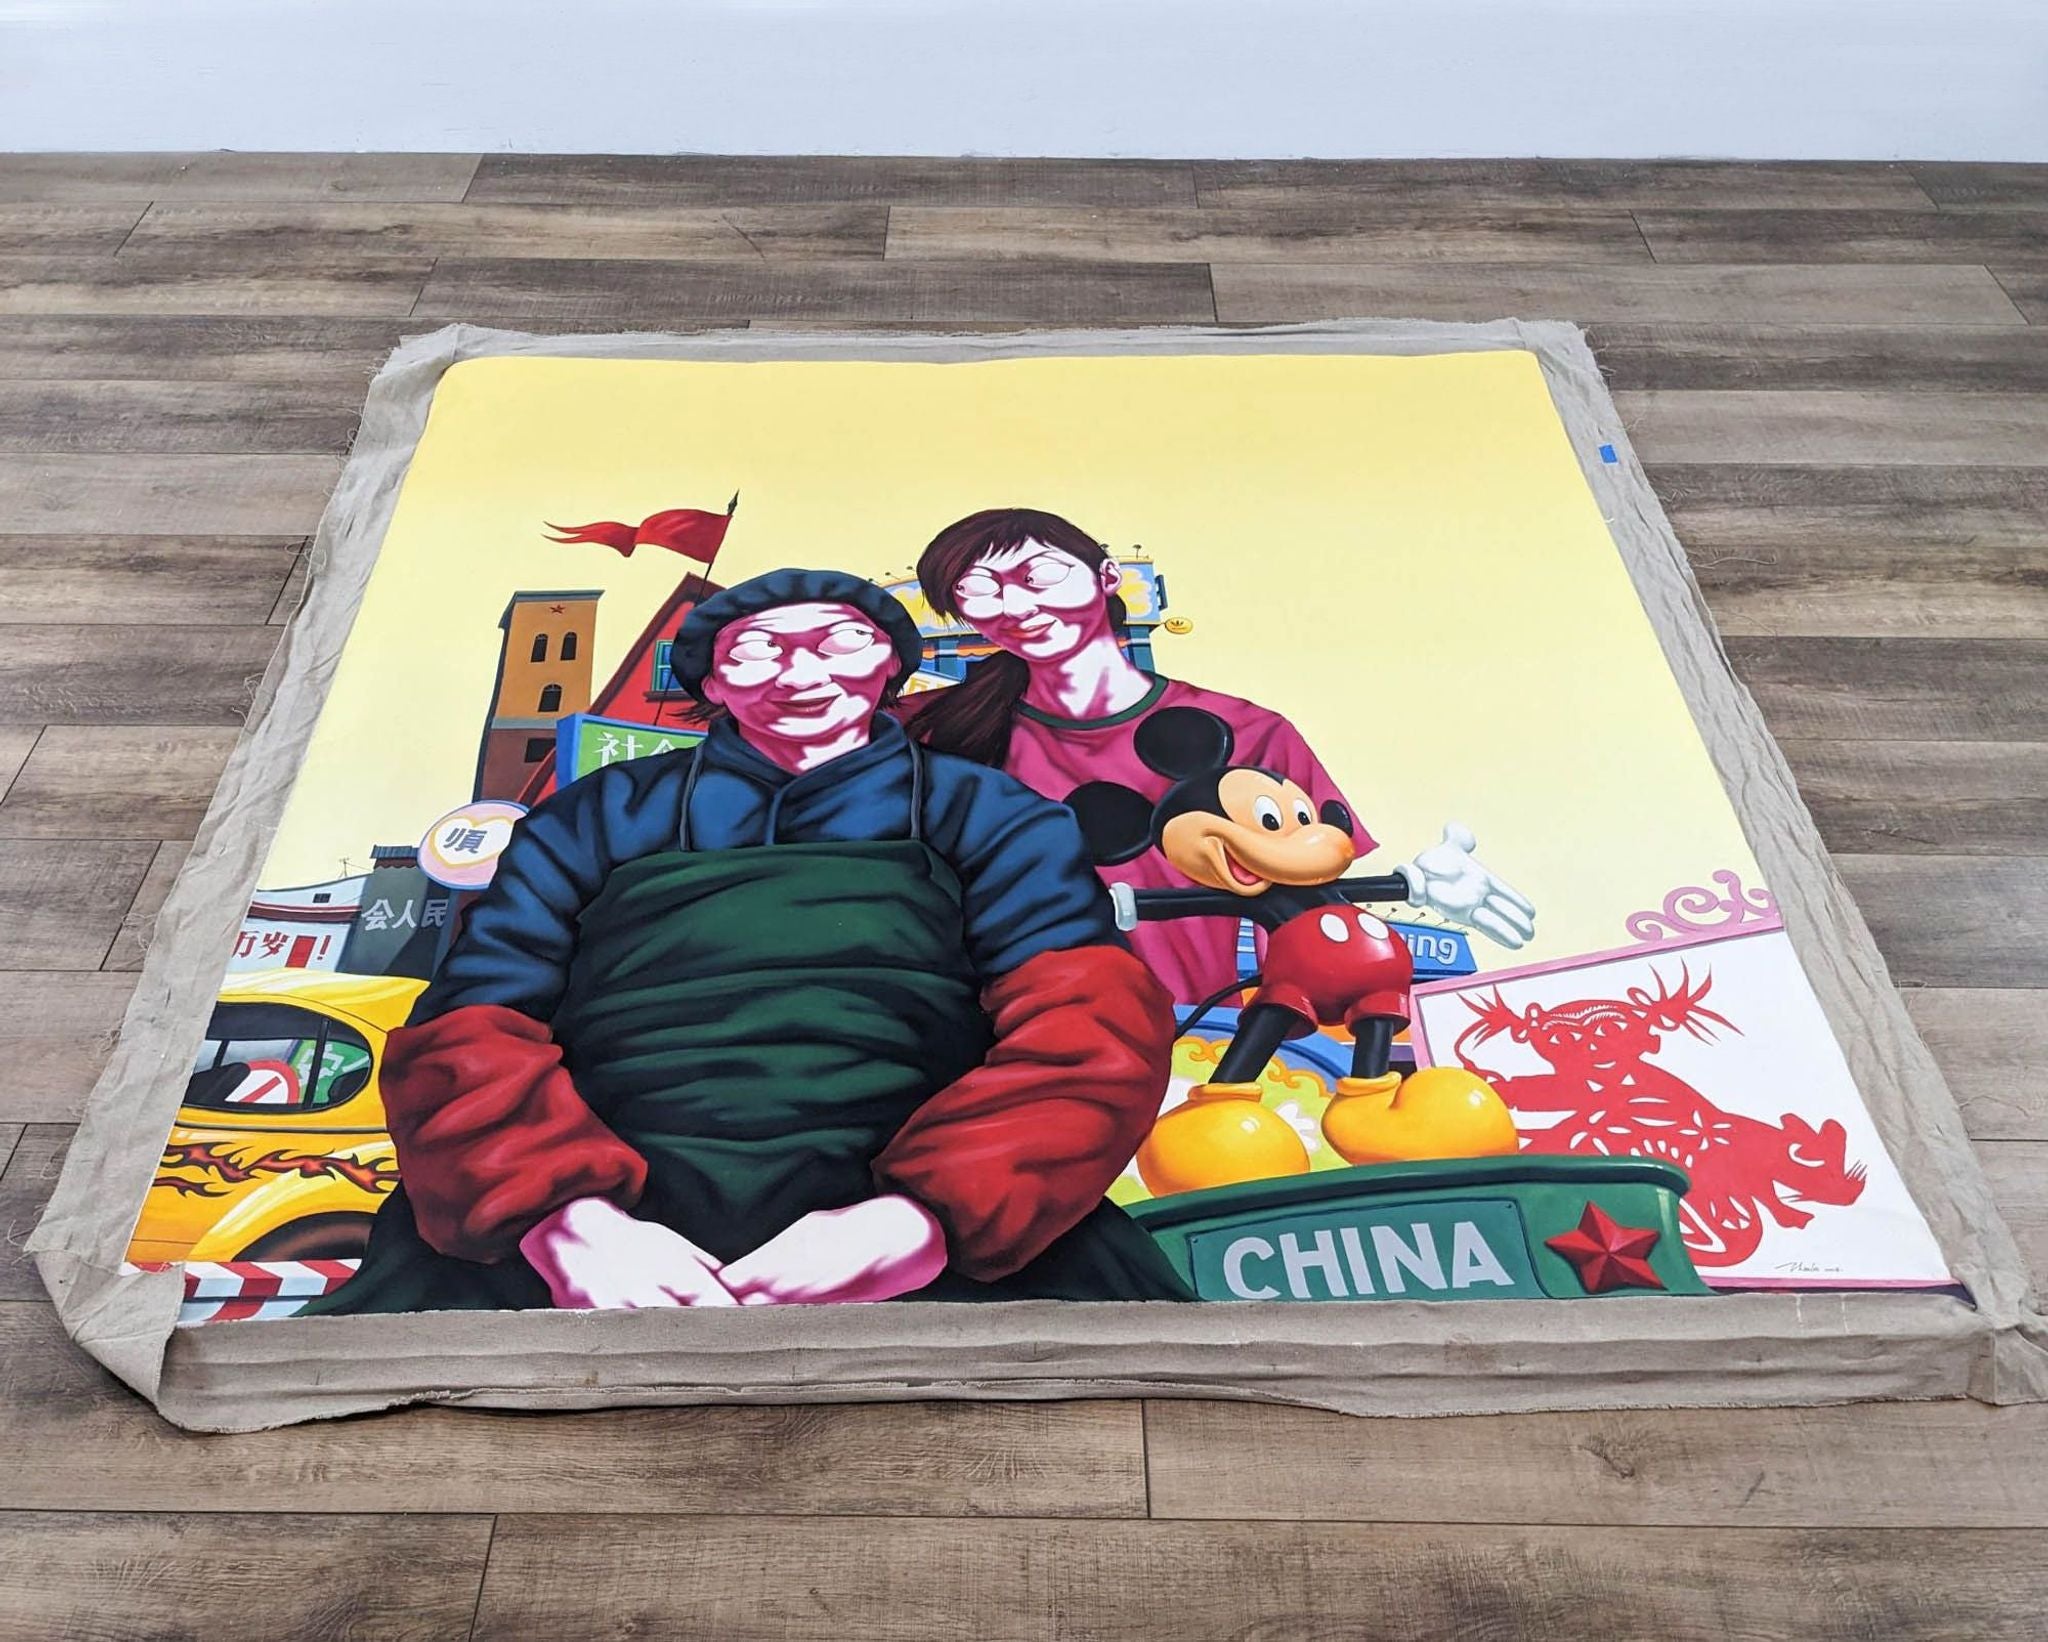 Colorful painting by Zhao Bo featuring two characters in red and green with obscured faces, Mickey Mouse, and various cultural elements, dated 2008, unsold and unframed.